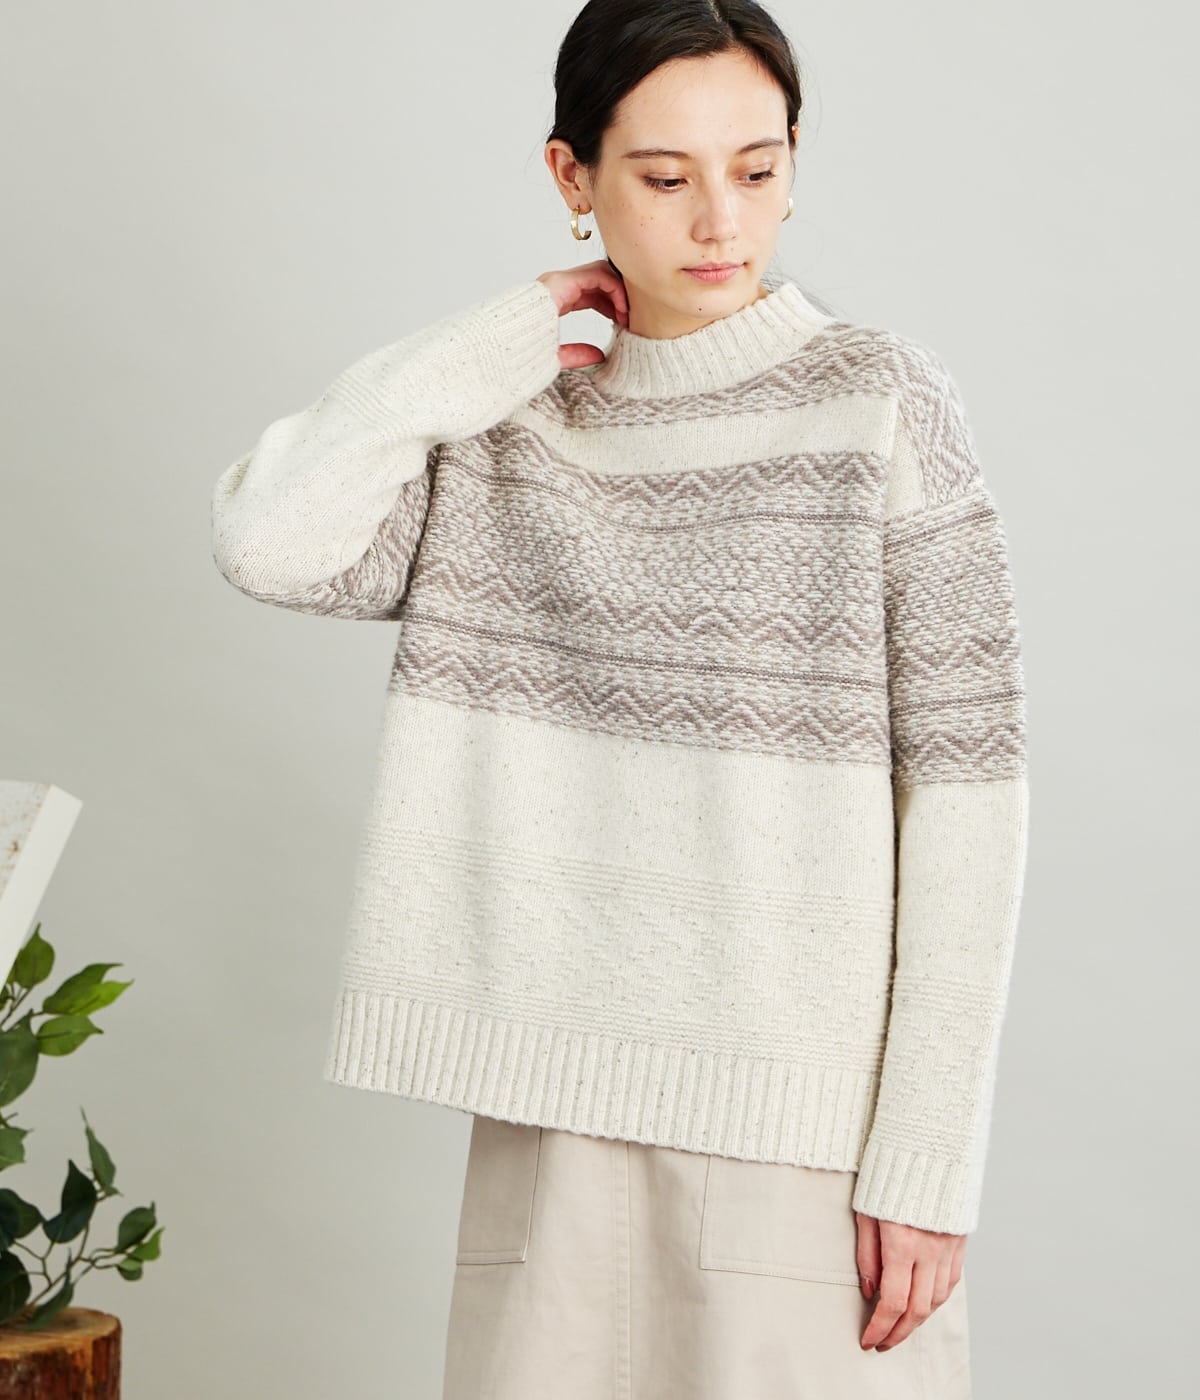 Donegal Wool Back Jacquard フェアアイル柄ニット